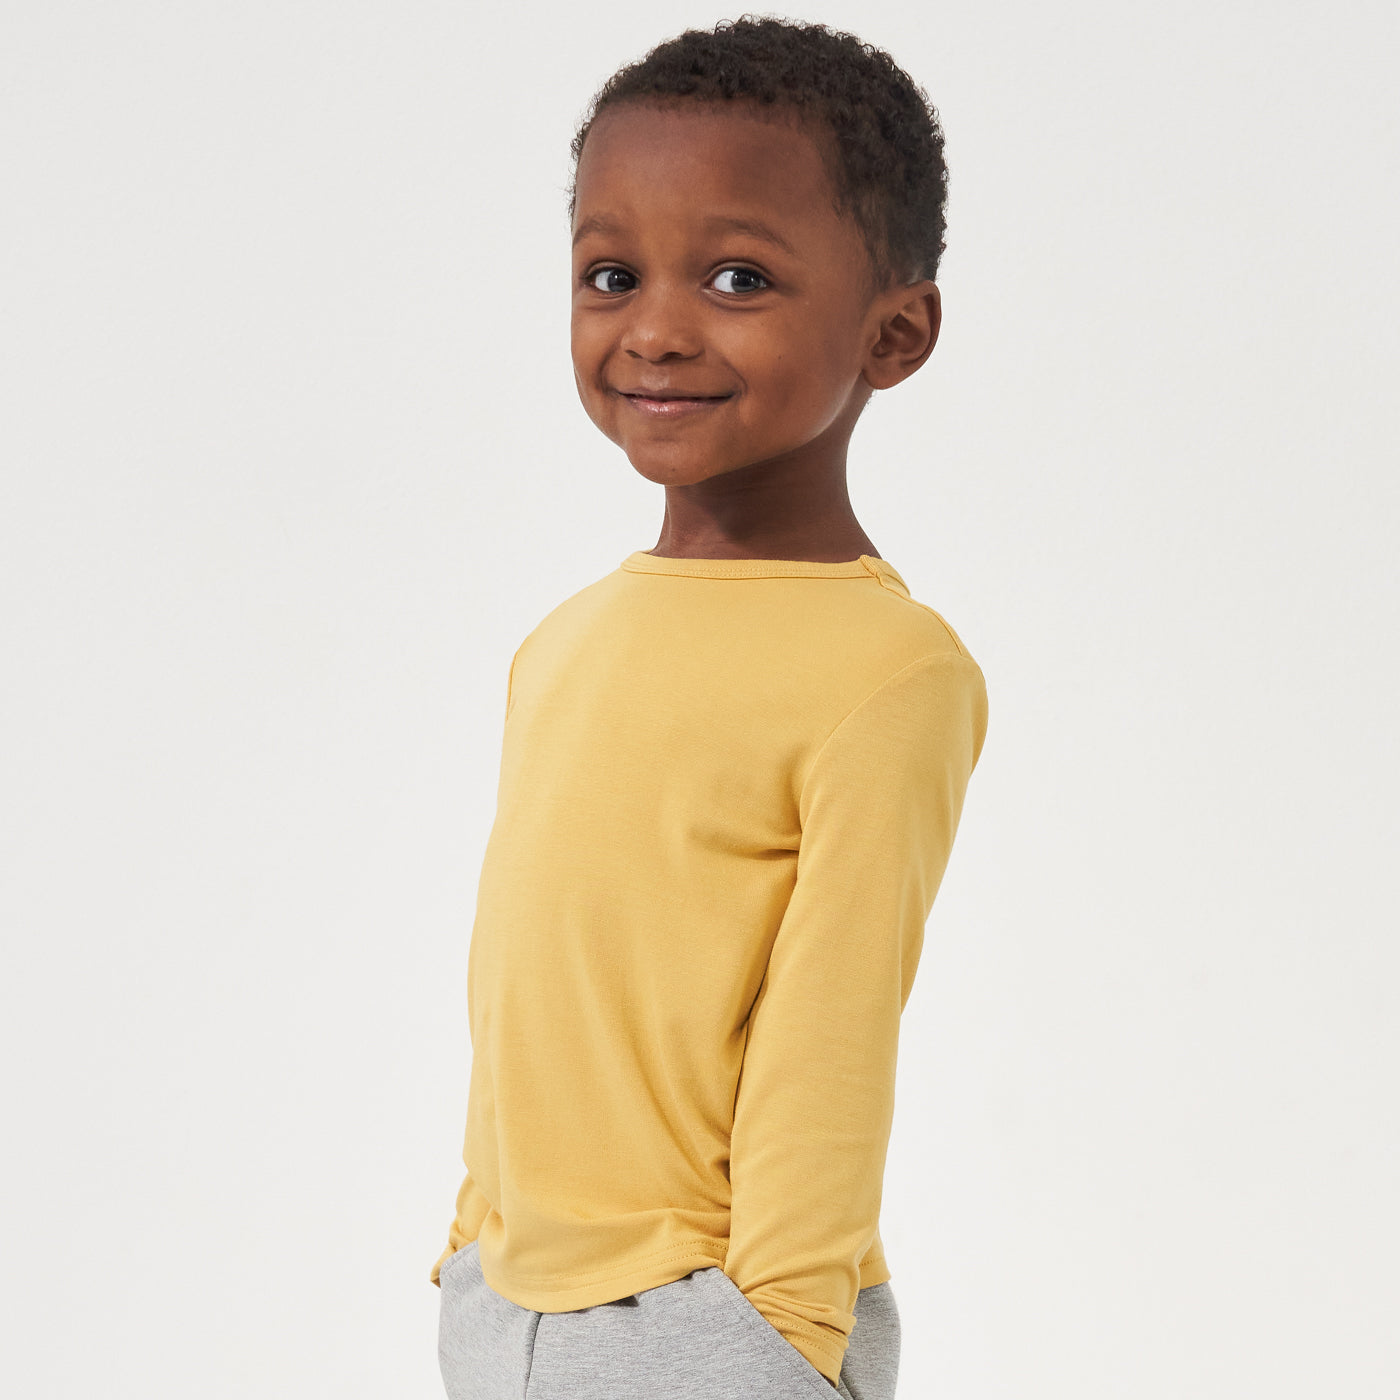 Alternate image of a child wearing a Honey classic tee